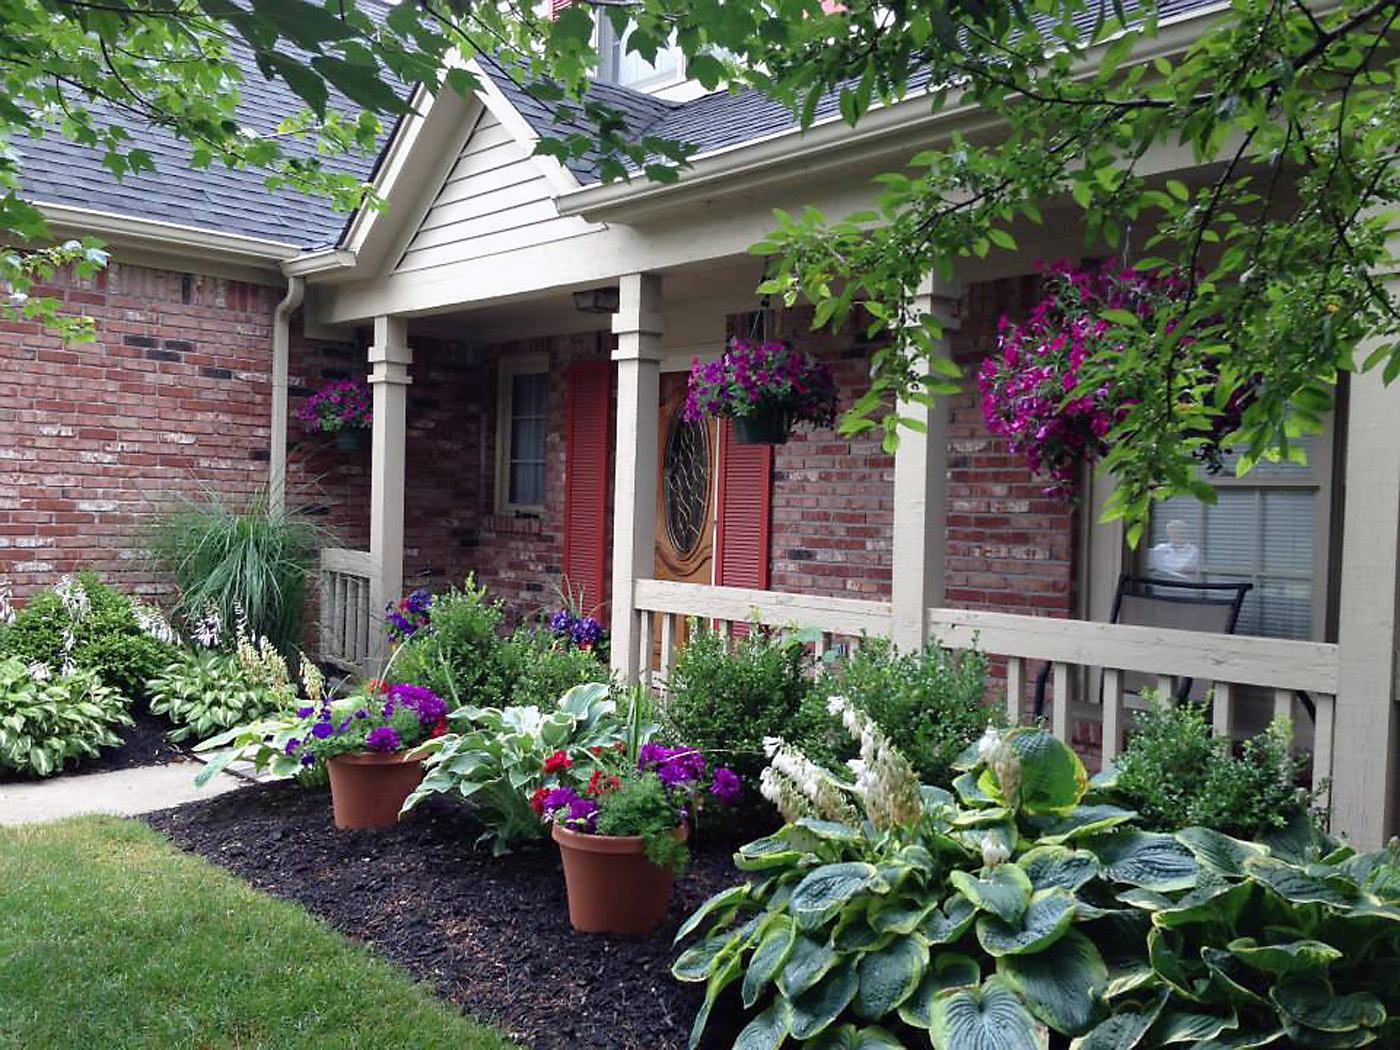 Mark and Brenda Jordan of 14601 Beacon Blvd. won the “Best Front Porch” category during last year’s floral competition, which had purple as its dominant color. (Submitted photo)